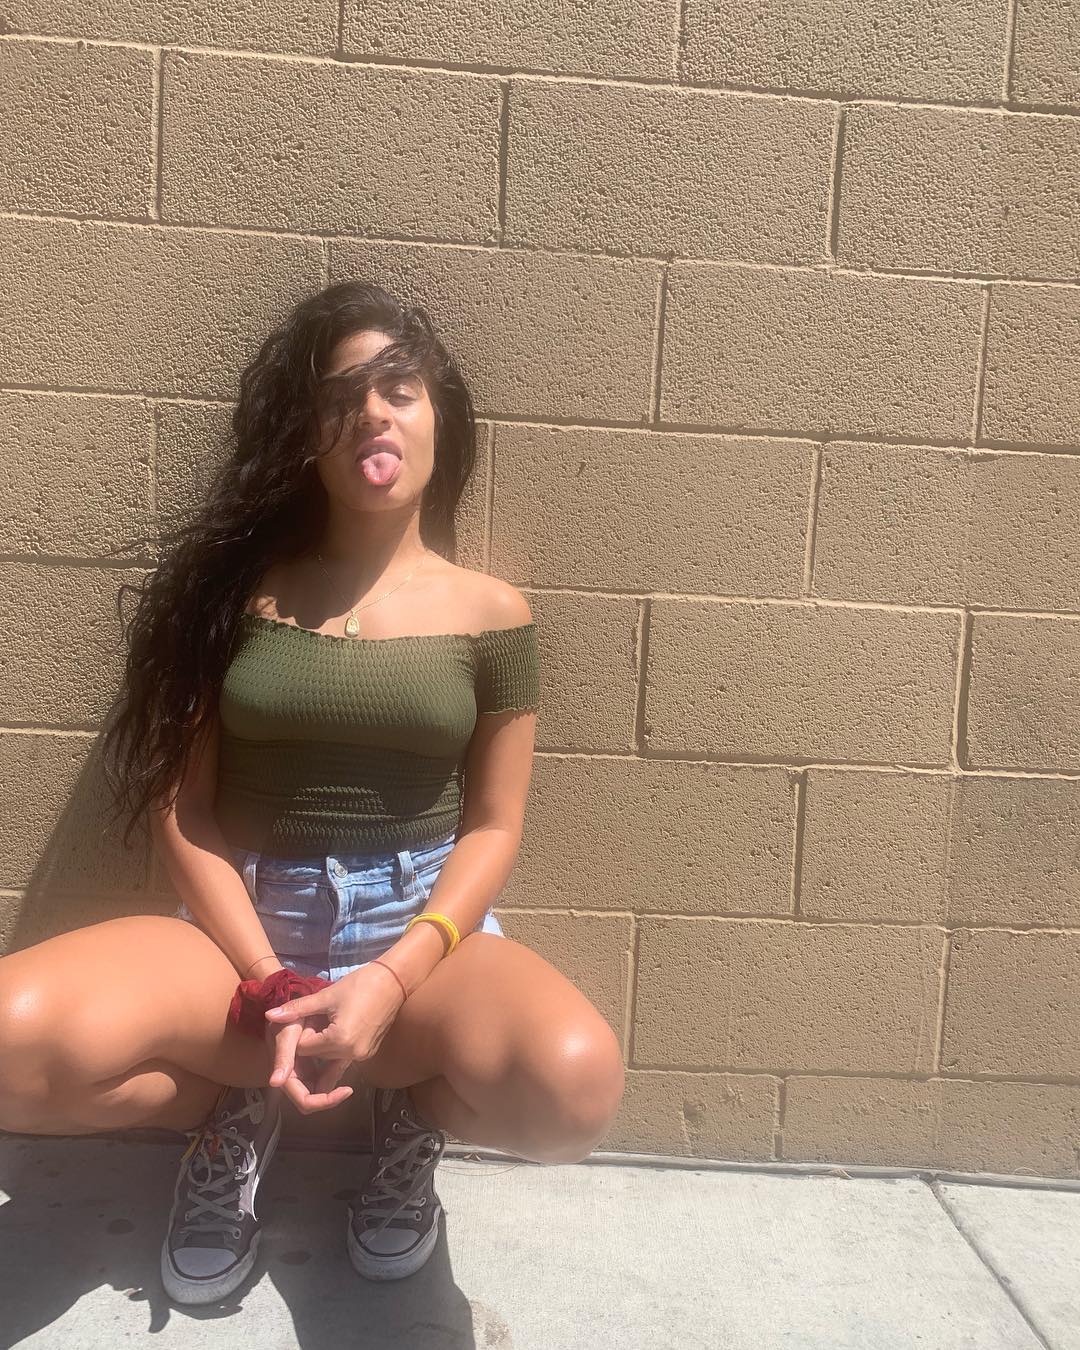 51 Hot Pictures Of Jessie Reyez Will Leave You Flabbergasted By Her Hot Magnificence 26